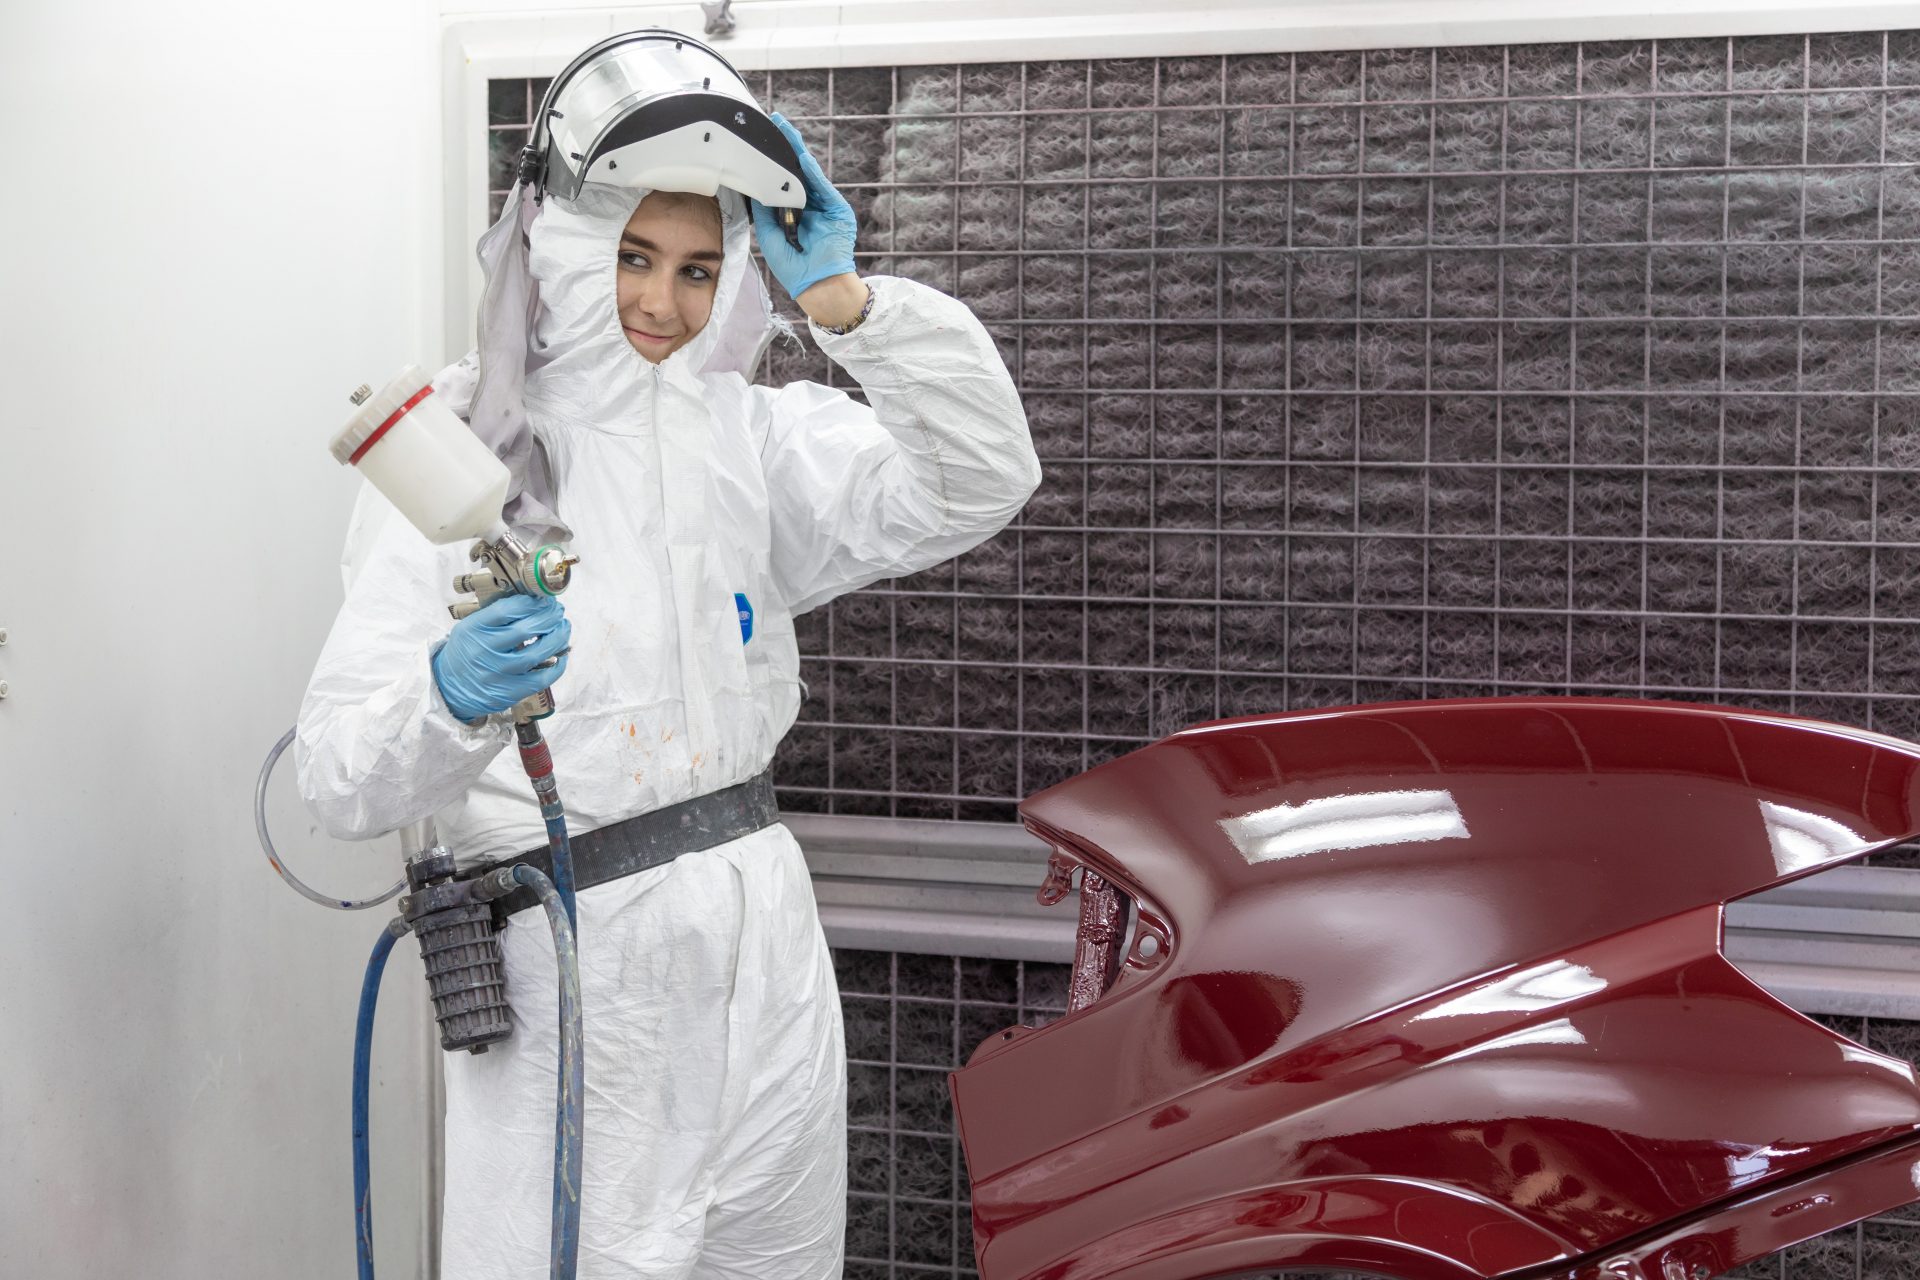 Vehicle bodywork student spraying and painting car bonnet.